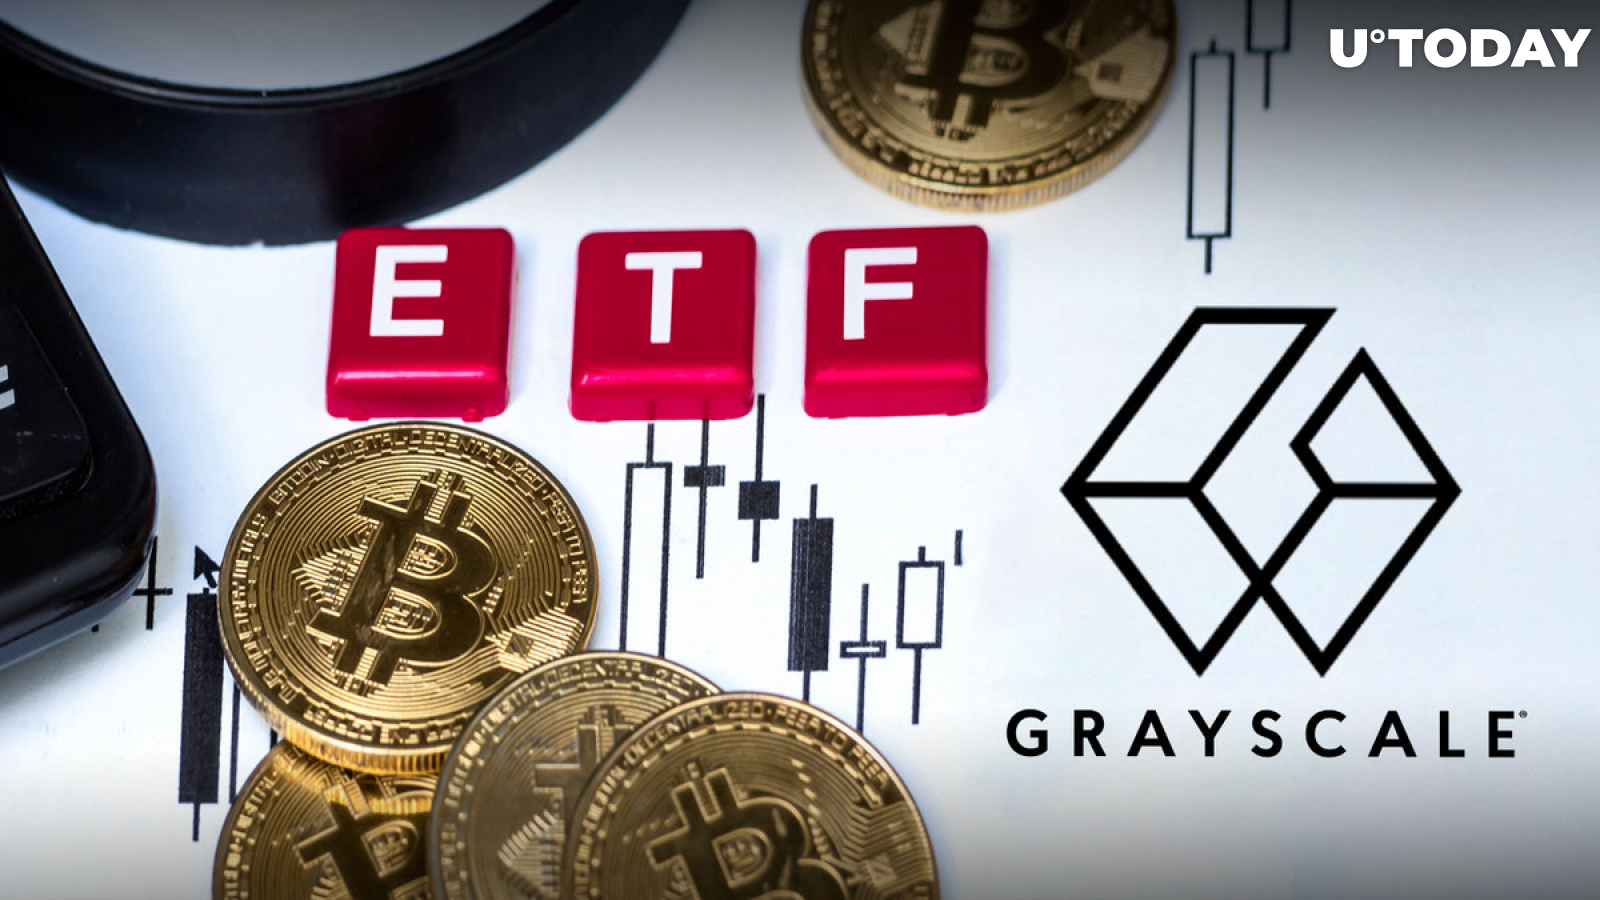 Bitcoin Price Falls By 5% As Grayscale’s BTC Outflows Hit $M